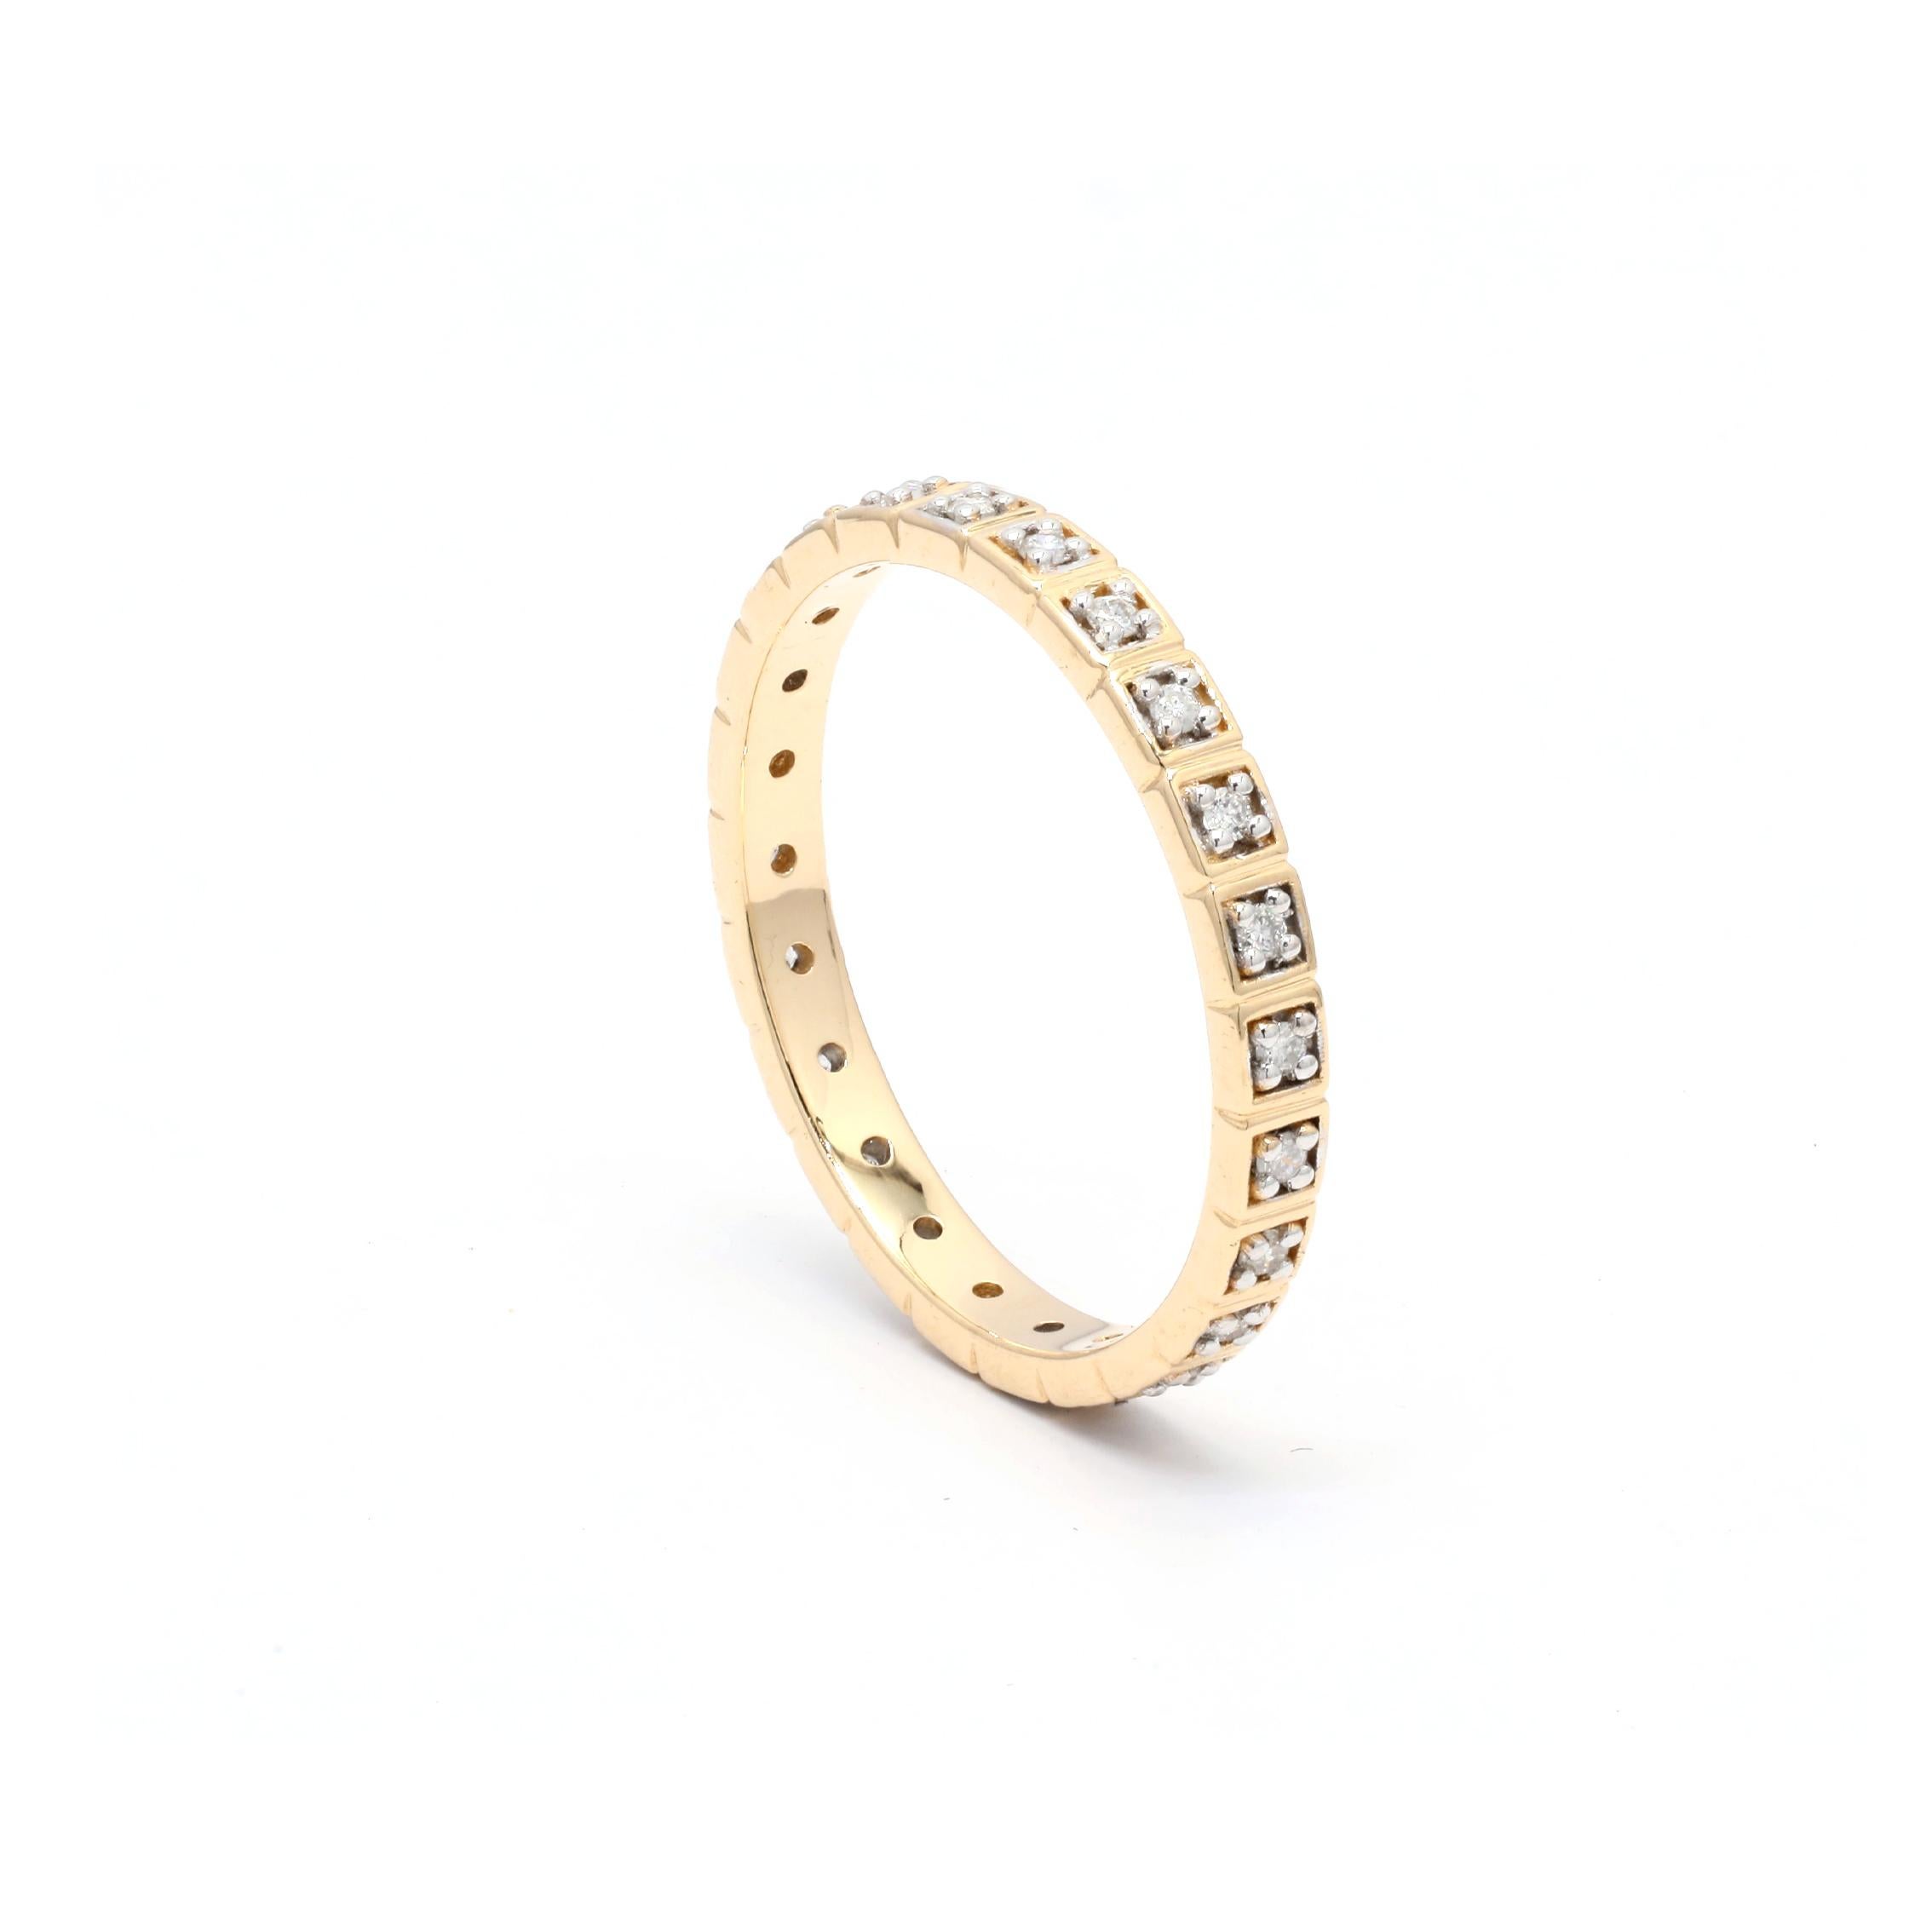 For Sale:  Unisex Diamond Eternity Band Ring in 14K Yellow Gold 5